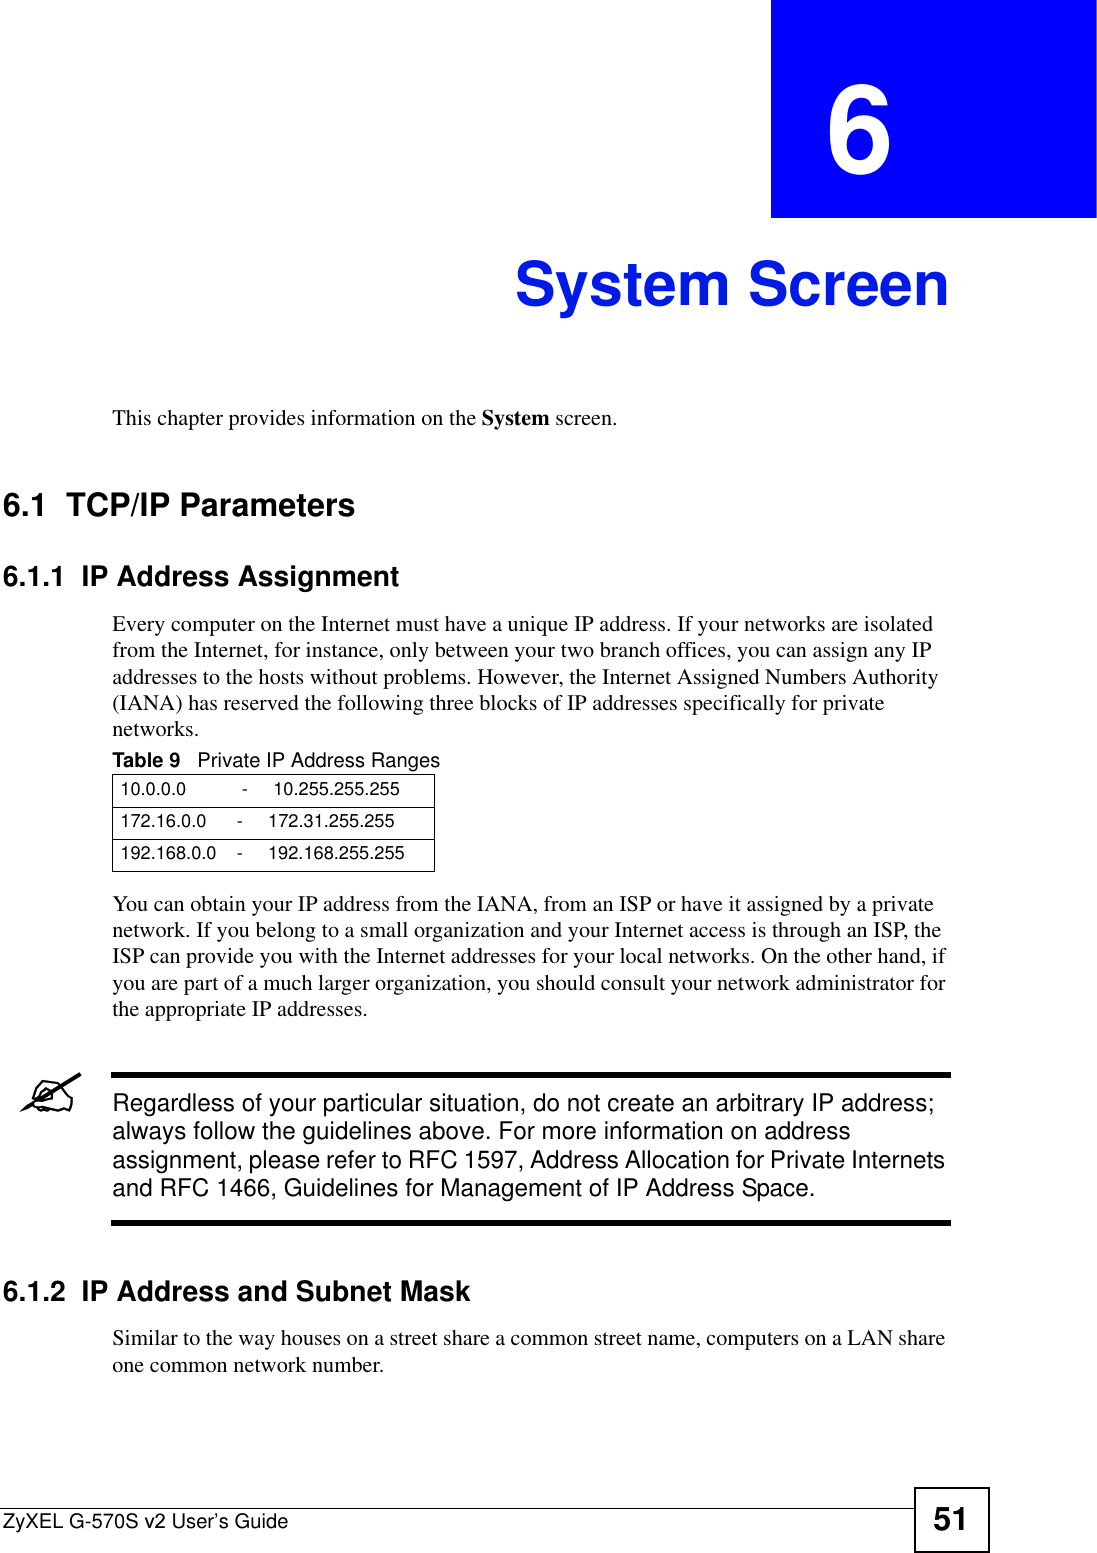 ZyXEL G-570S v2 User’s Guide 51CHAPTER  6 System ScreenThis chapter provides information on the System screen.6.1  TCP/IP Parameters6.1.1  IP Address Assignment Every computer on the Internet must have a unique IP address. If your networks are isolated from the Internet, for instance, only between your two branch offices, you can assign any IP addresses to the hosts without problems. However, the Internet Assigned Numbers Authority (IANA) has reserved the following three blocks of IP addresses specifically for private networks.You can obtain your IP address from the IANA, from an ISP or have it assigned by a private network. If you belong to a small organization and your Internet access is through an ISP, the ISP can provide you with the Internet addresses for your local networks. On the other hand, if you are part of a much larger organization, you should consult your network administrator for the appropriate IP addresses.&quot;Regardless of your particular situation, do not create an arbitrary IP address; always follow the guidelines above. For more information on address assignment, please refer to RFC 1597, Address Allocation for Private Internets and RFC 1466, Guidelines for Management of IP Address Space.6.1.2  IP Address and Subnet MaskSimilar to the way houses on a street share a common street name, computers on a LAN share one common network number.Table 9   Private IP Address Ranges10.0.0.0           -     10.255.255.255172.16.0.0      -     172.31.255.255192.168.0.0    -     192.168.255.255